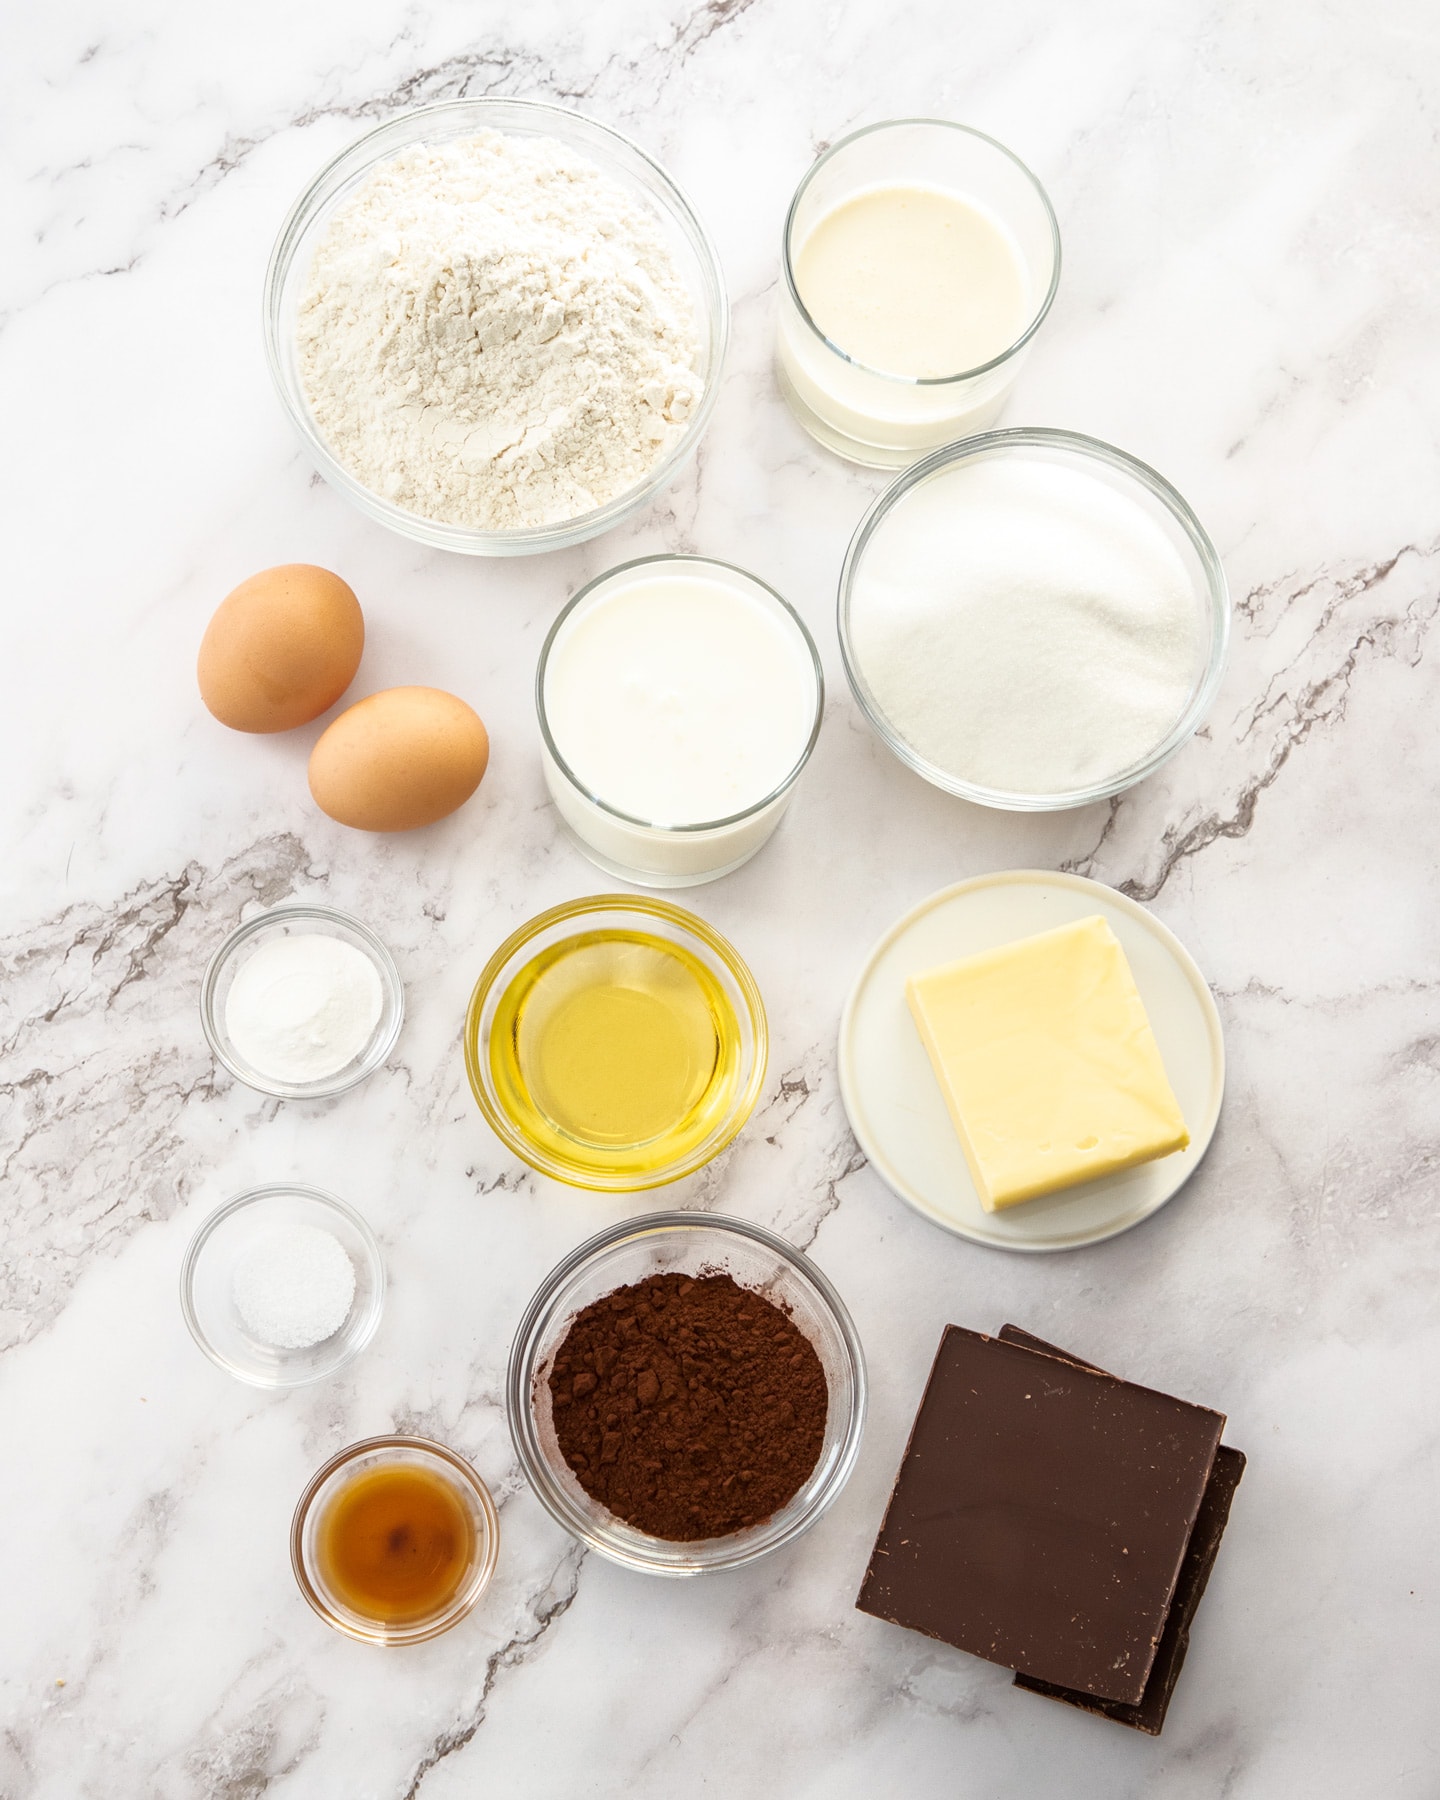 Ingredients for marble loaf cake on a marble surface.